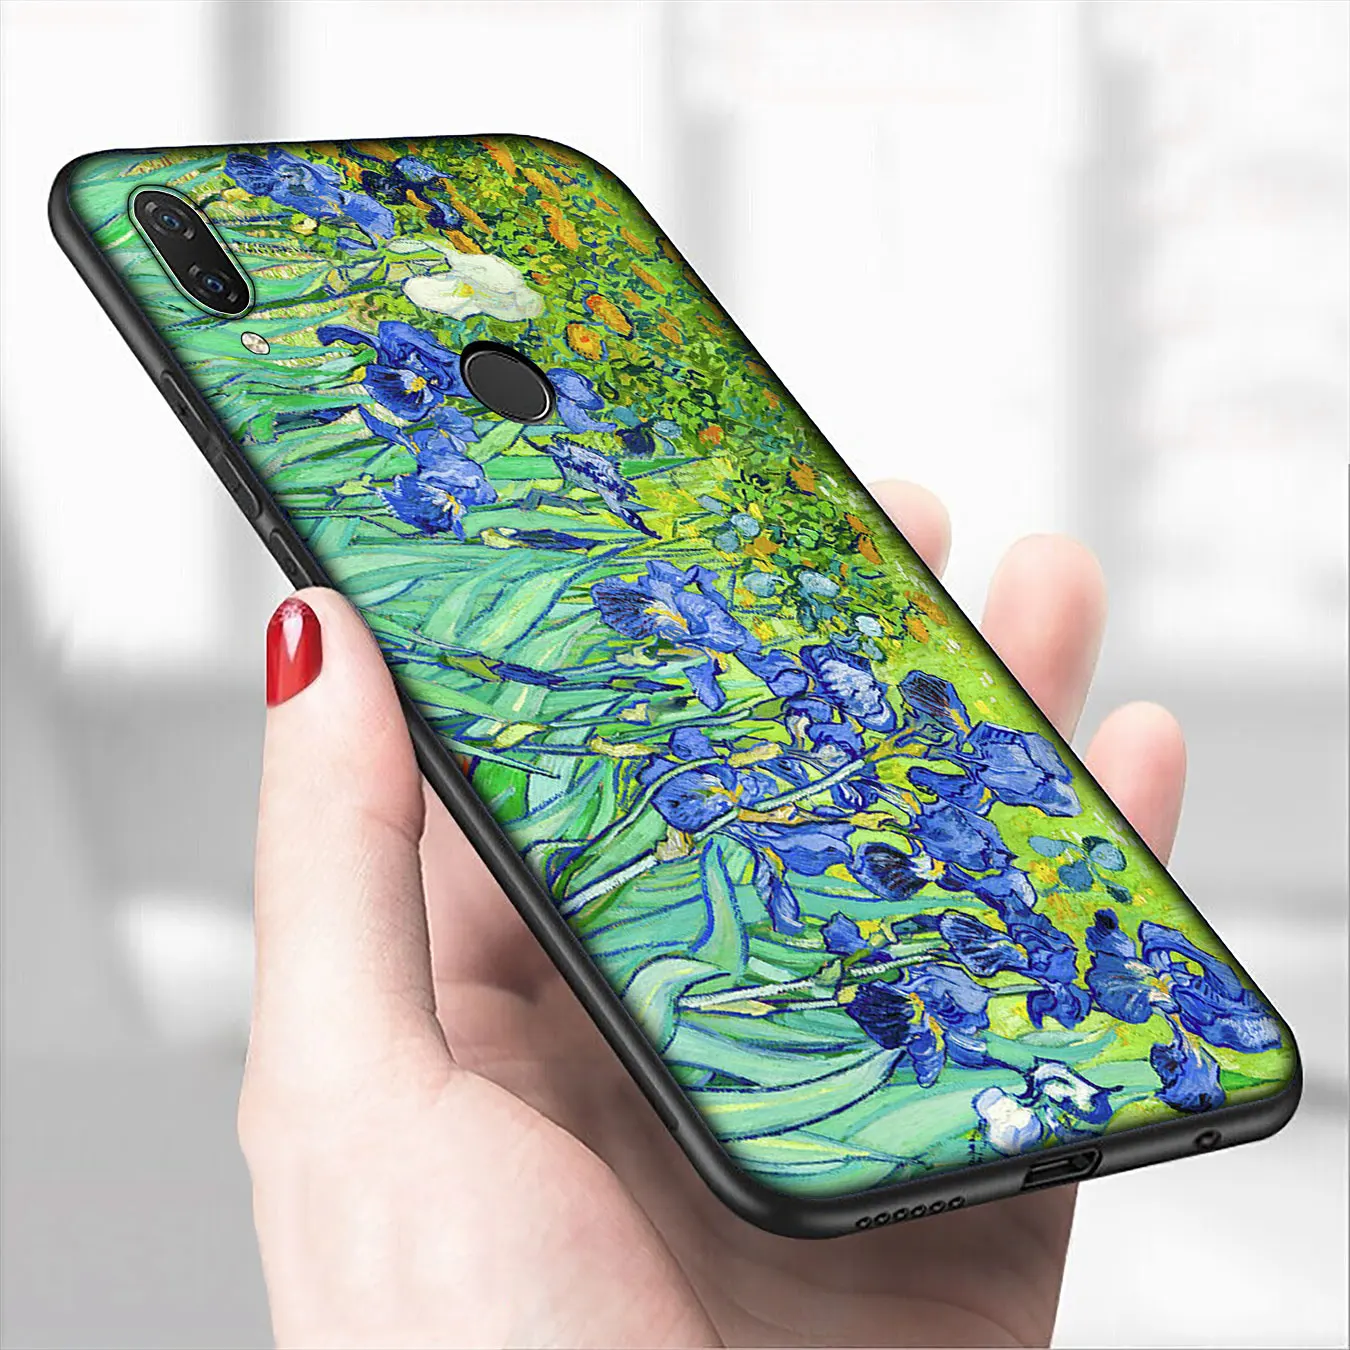 IYICAO Starry Night Van Gogh Soft Silicone Phone Case for Xiaomi Redmi Note 8 8T 8A 7 7A 6 6A 5 5A GO S2 K30 K20 Pro Cover | Мобильные